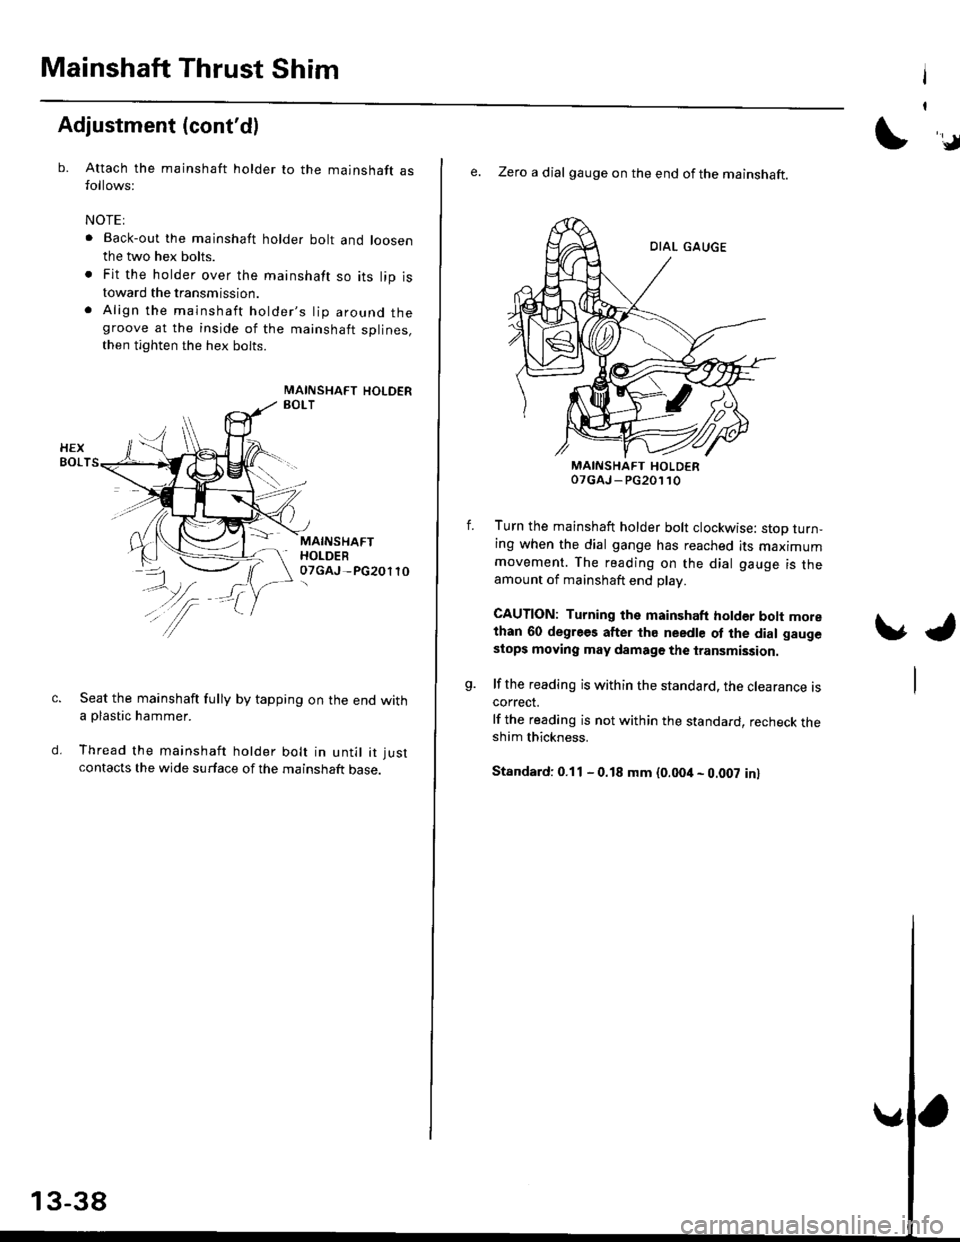 HONDA CIVIC 1997 6.G Workshop Manual Mainshaft Thrust ShimI
I
Adjustment (contdl
b.Attach the mainshaft holder to the mainshaft asfollows:
NOTEI
. Back-out the mainshaft holder bolt and loosen
the two hex bolts.
. Fit the holder over th